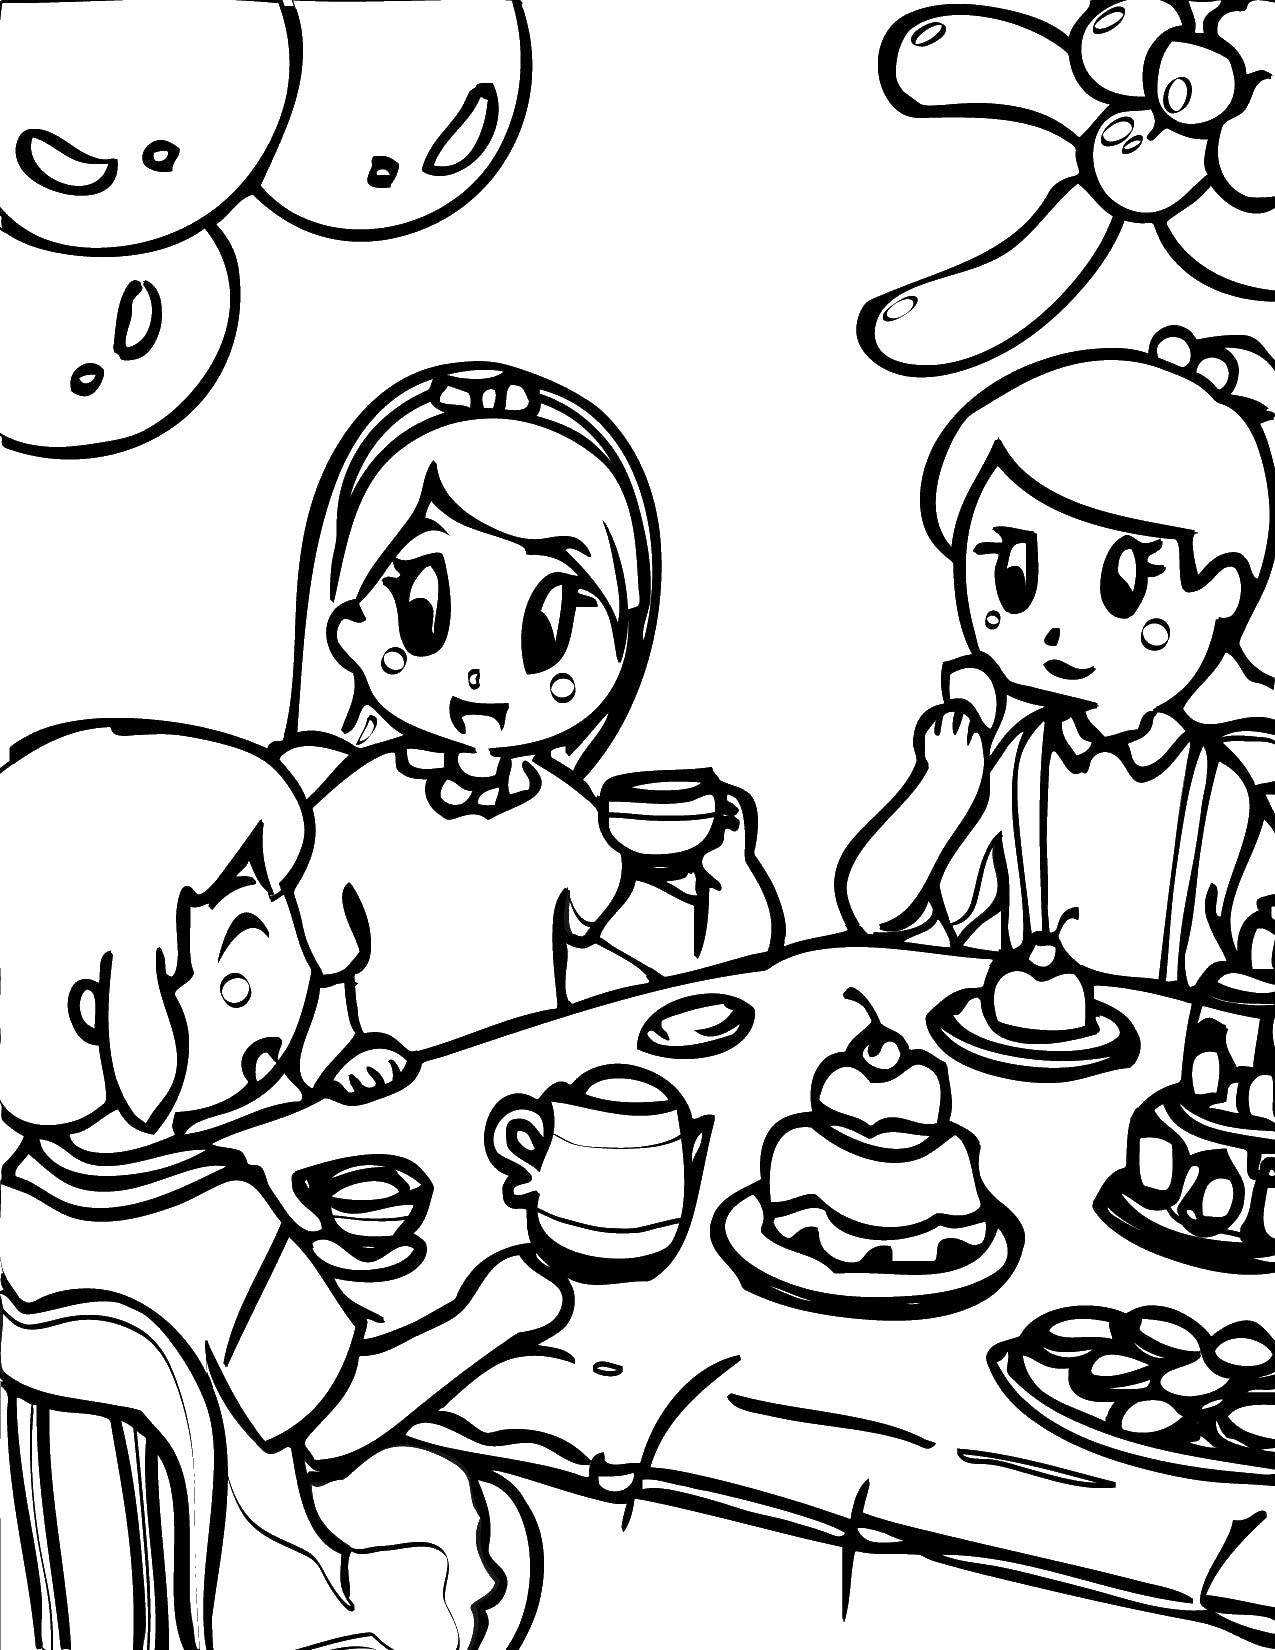 Coloring The girls at the table. Category coloring. Tags:  girls tea party.